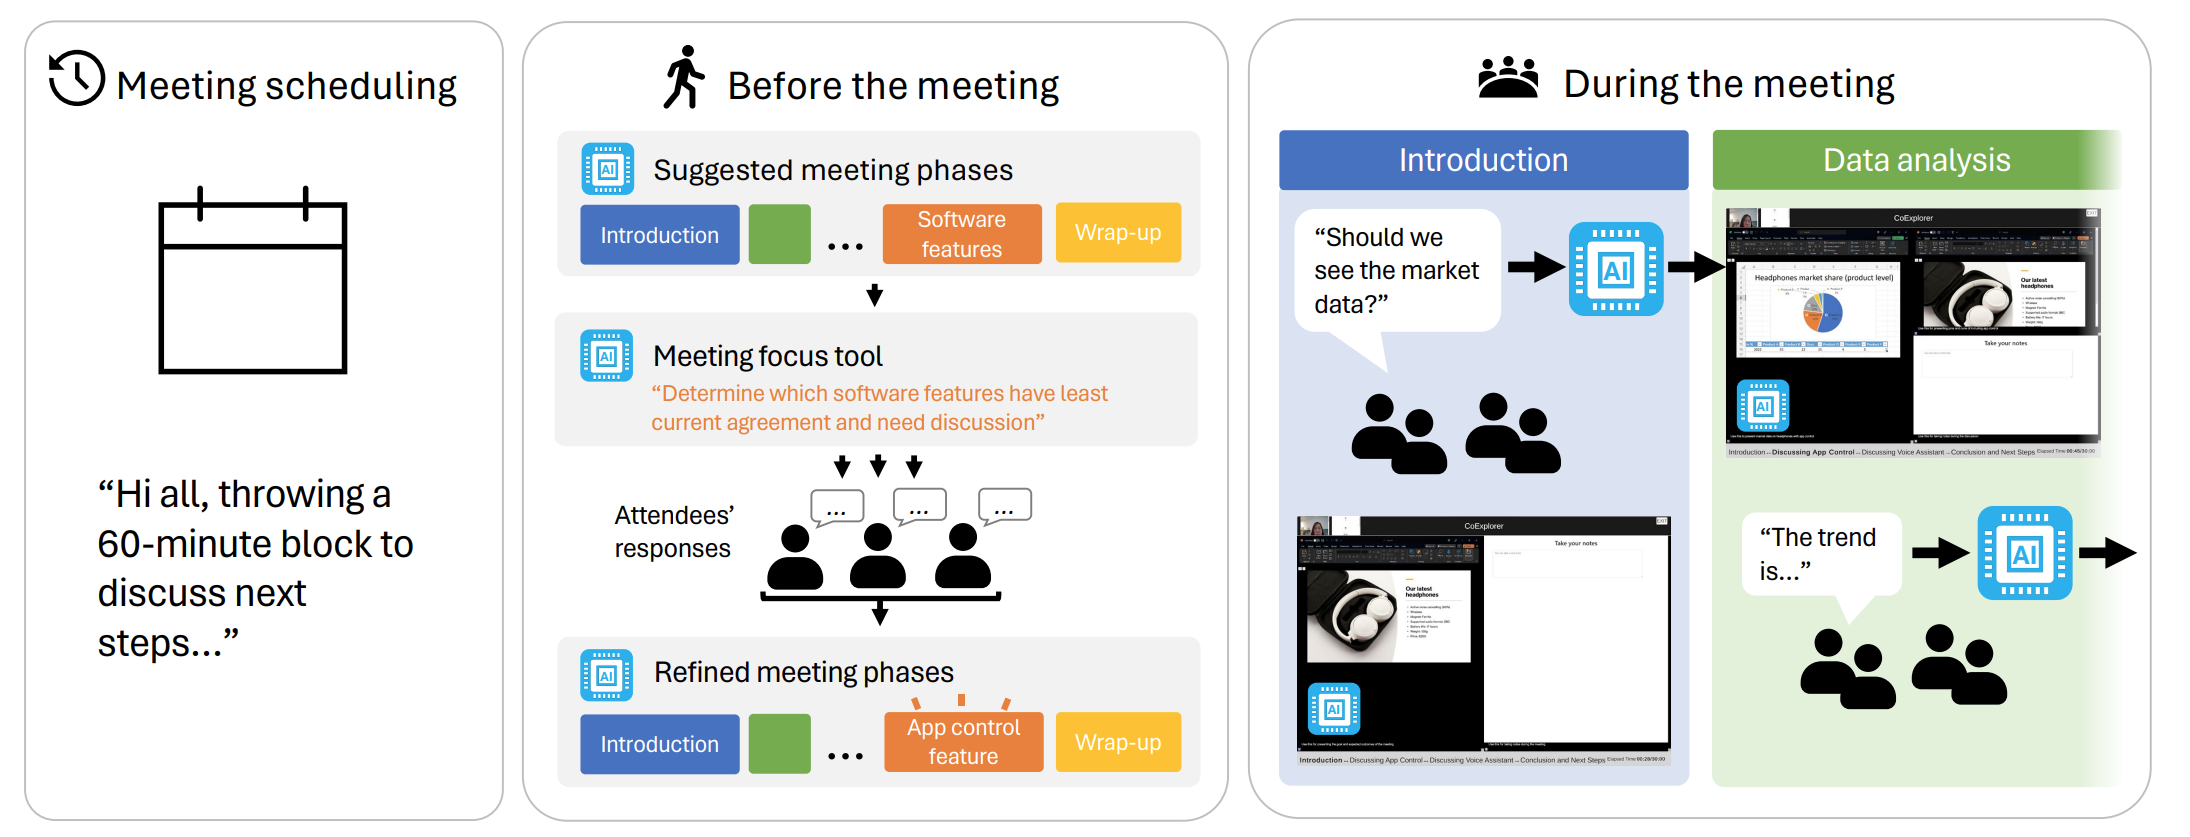 Exploring the CoExplorer Technology Probe: Enhancing Video Meetings with AI-Powered Adaptive Interface for Intentional Planning and Execution